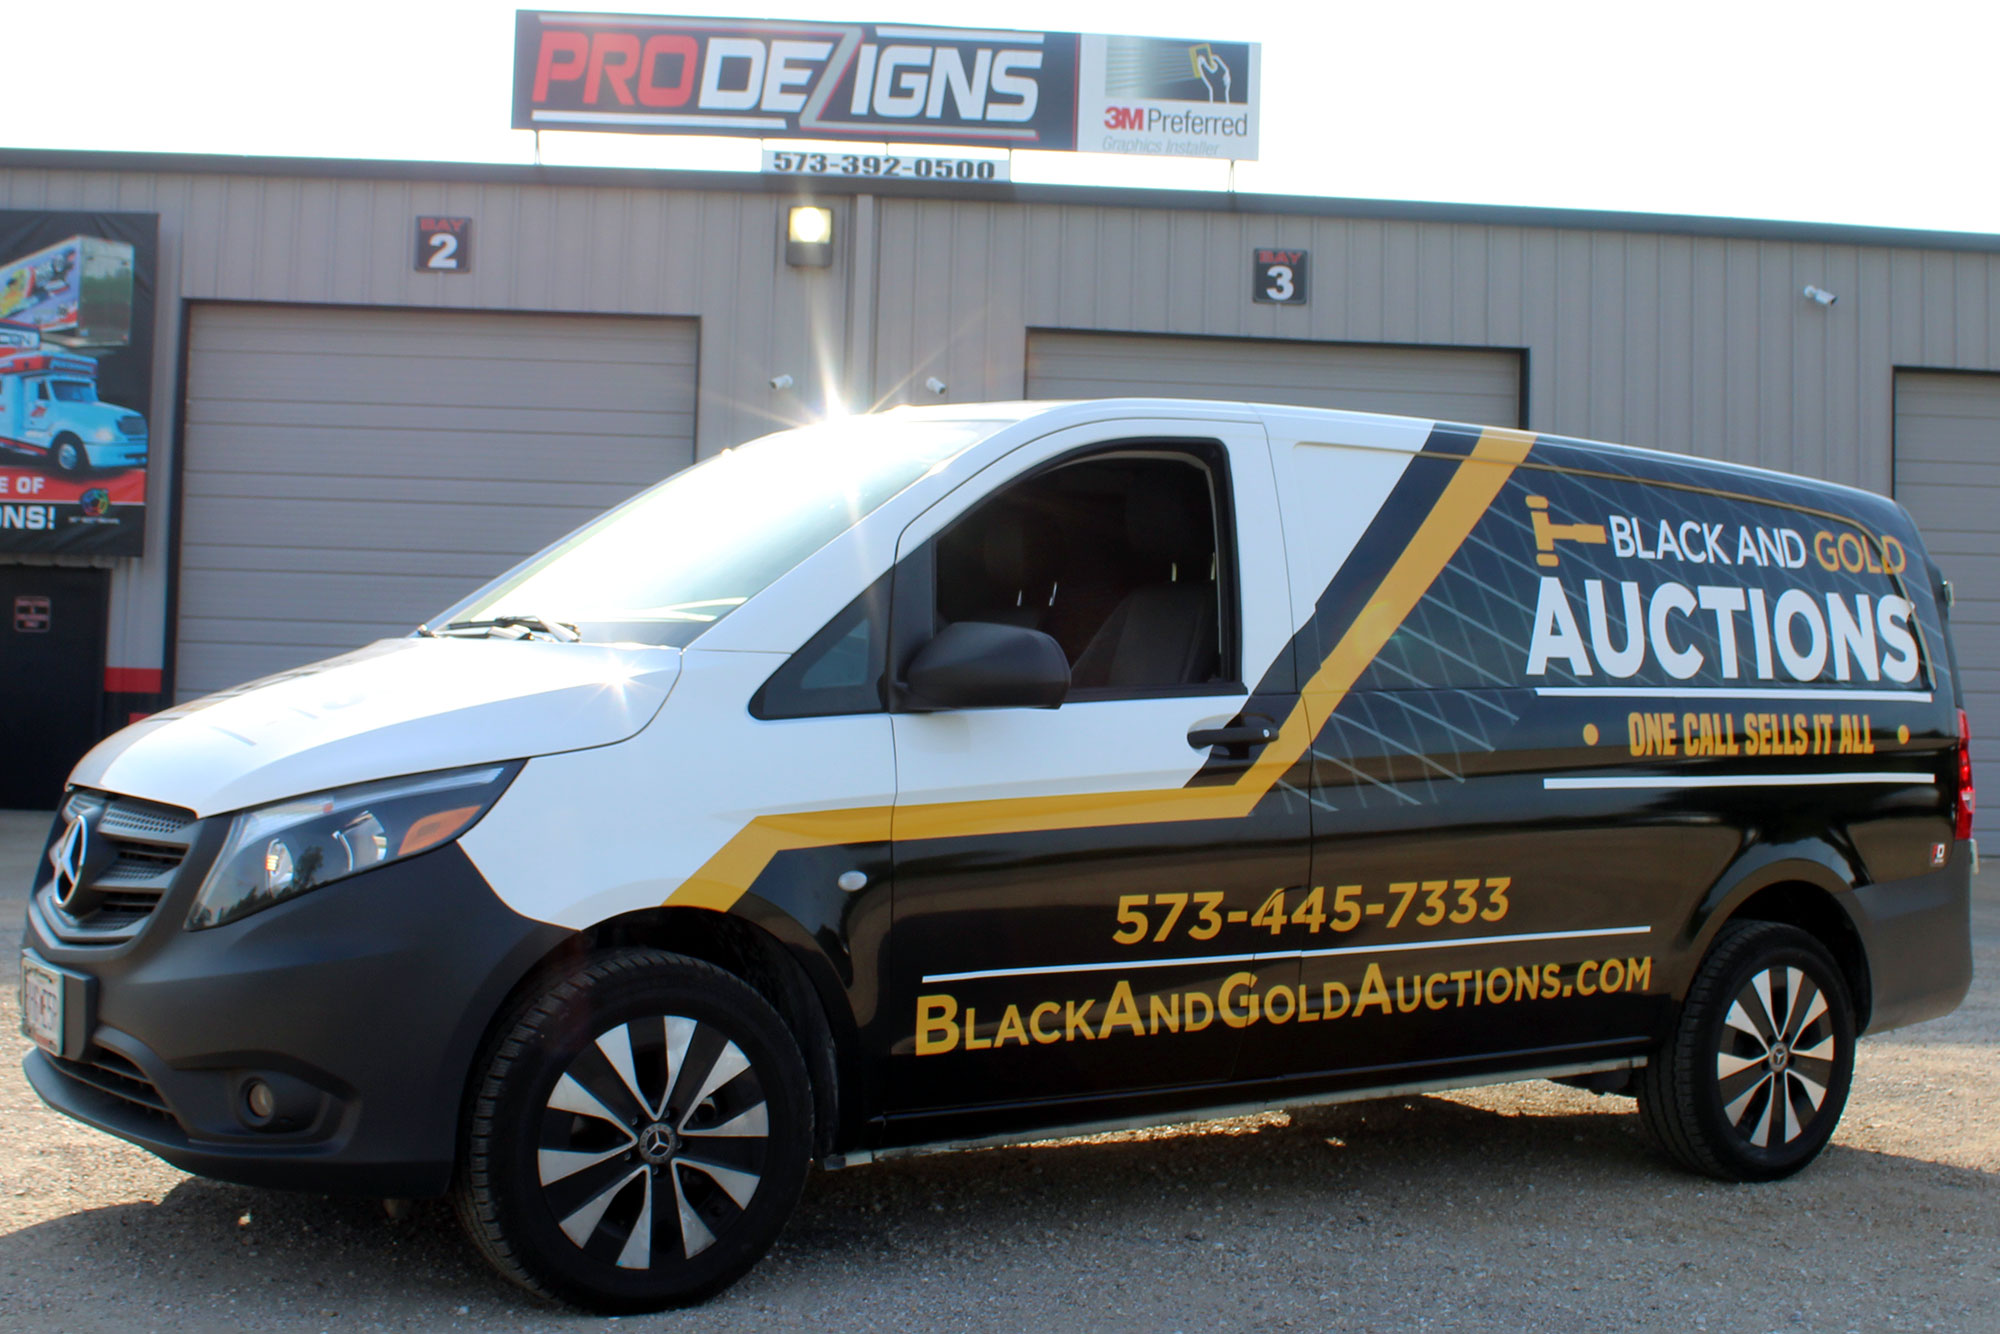 Black And Gold Auctions Pro Dezigns Columbia Missouri